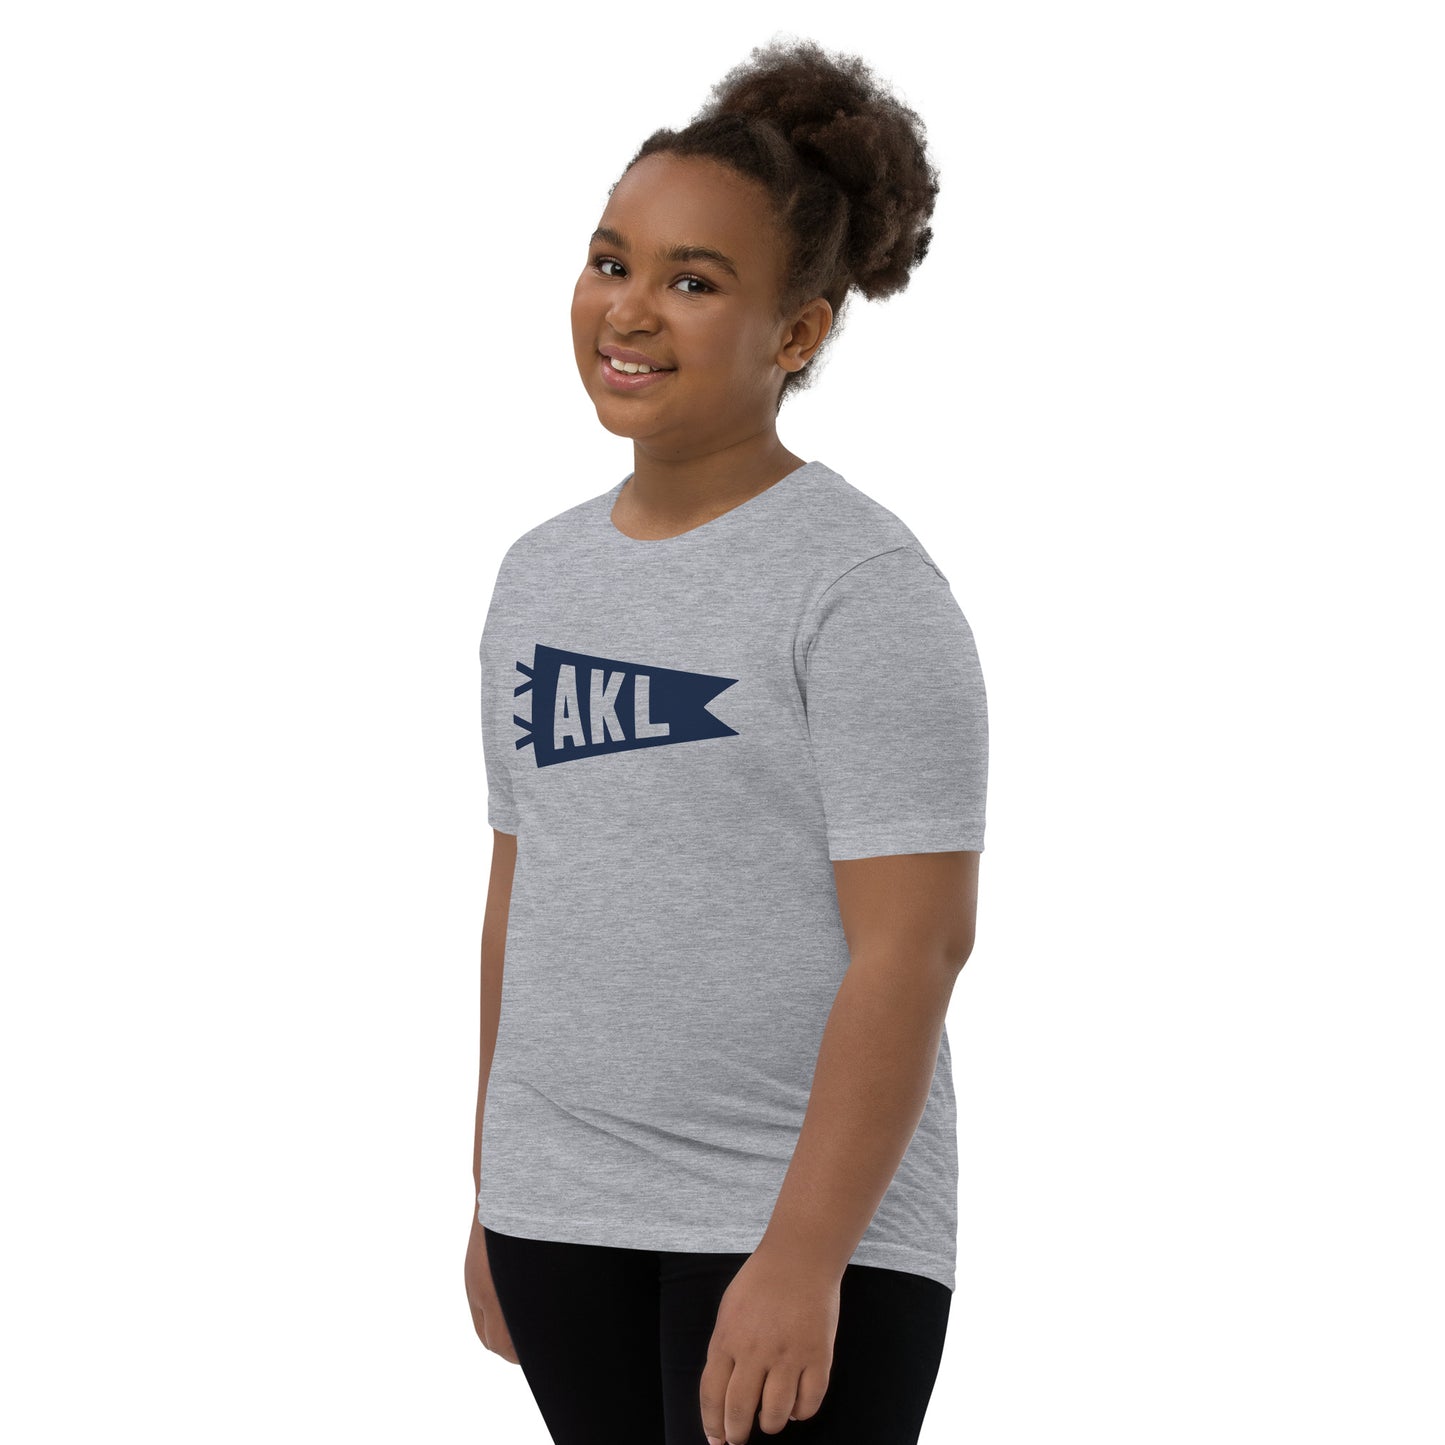 Kid's Airport Code Tee - Navy Blue Graphic • AKL Auckland • YHM Designs - Image 04